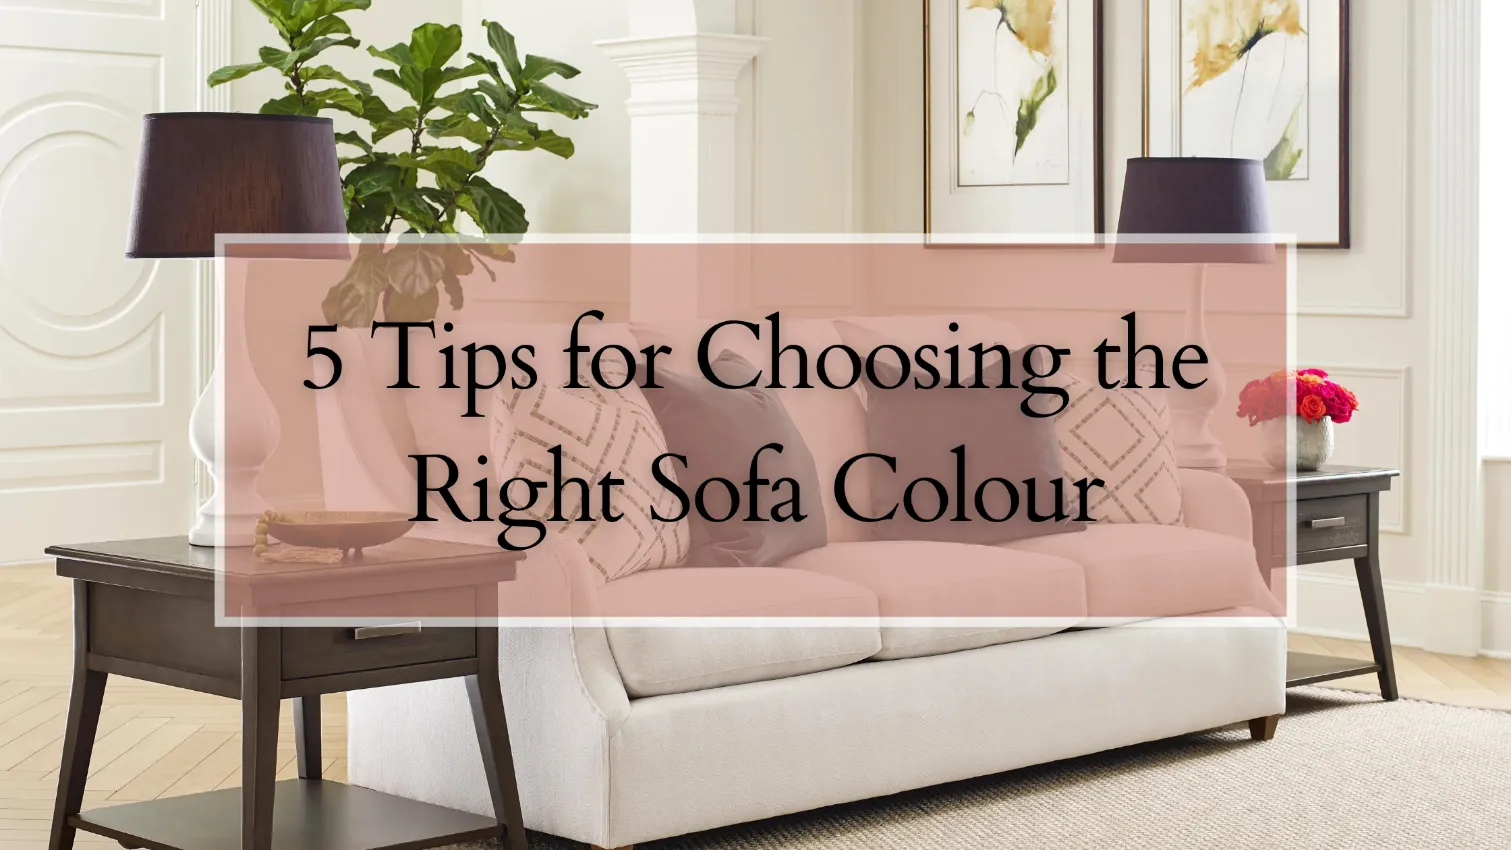 Top 5 Tips for Choosing the Right Sofa Colour for Your Living Room